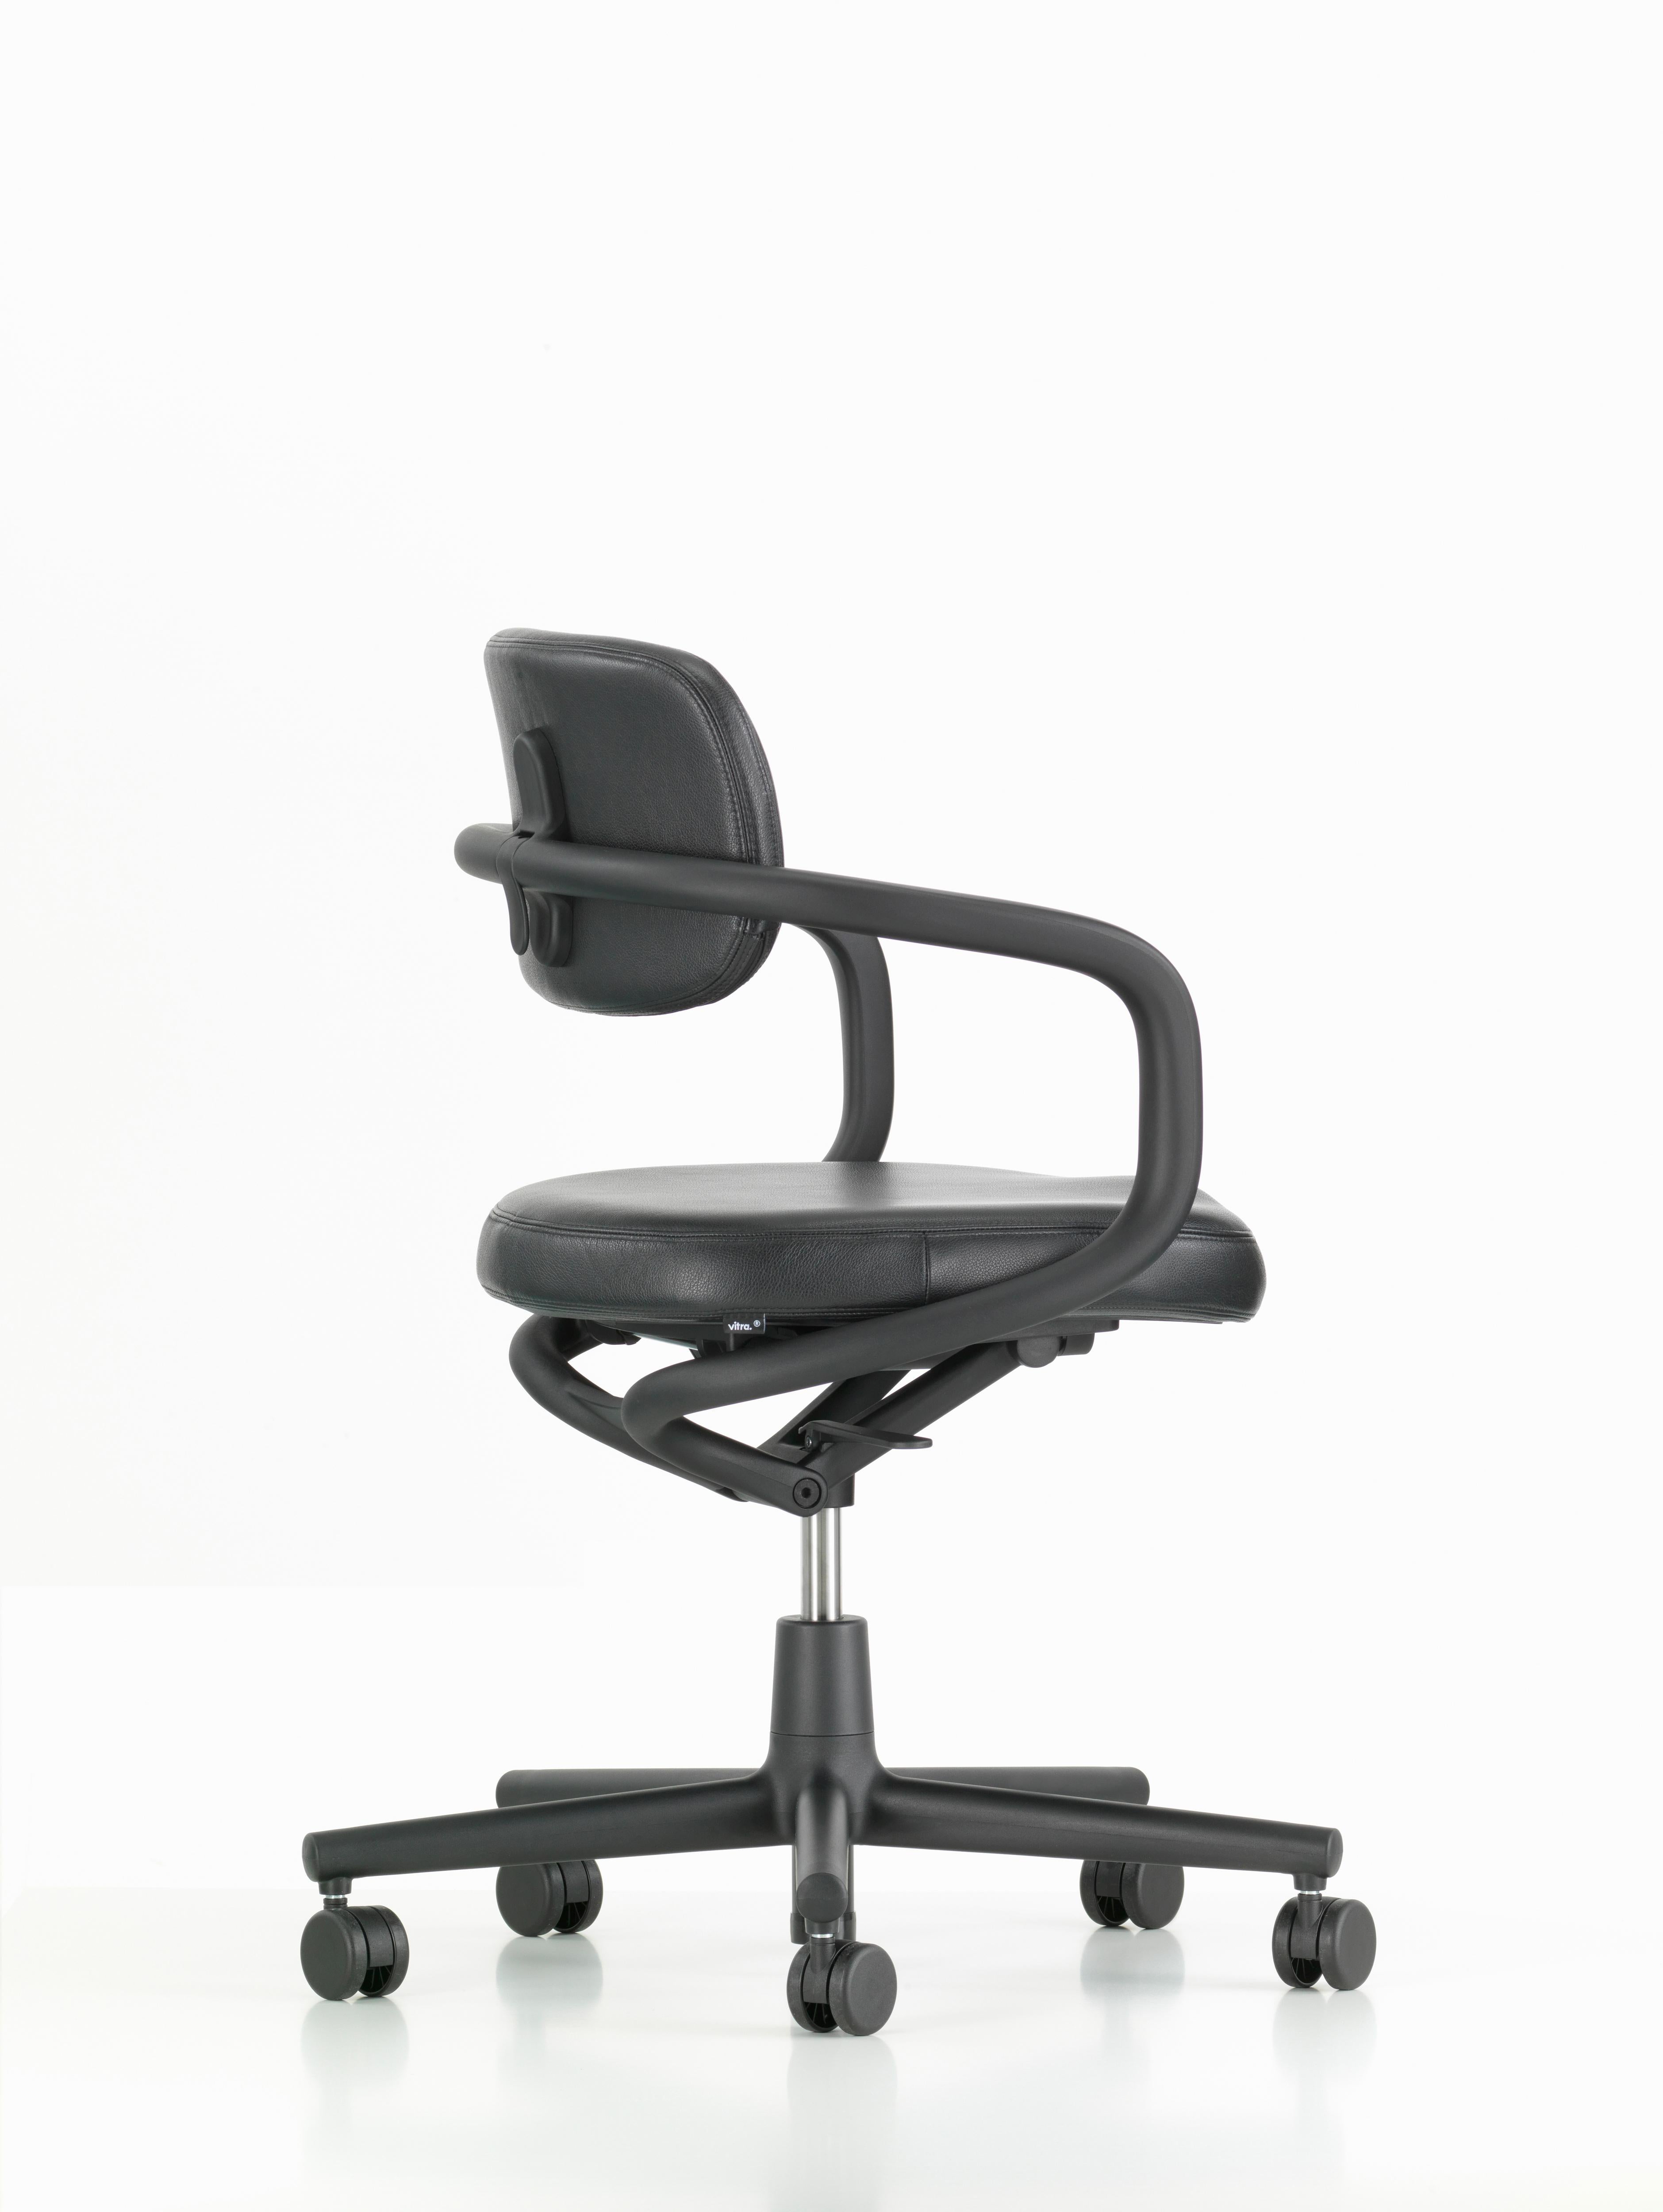 Modern Vitra Allstar Chair in Nero Leather by Konstantin Grcic For Sale